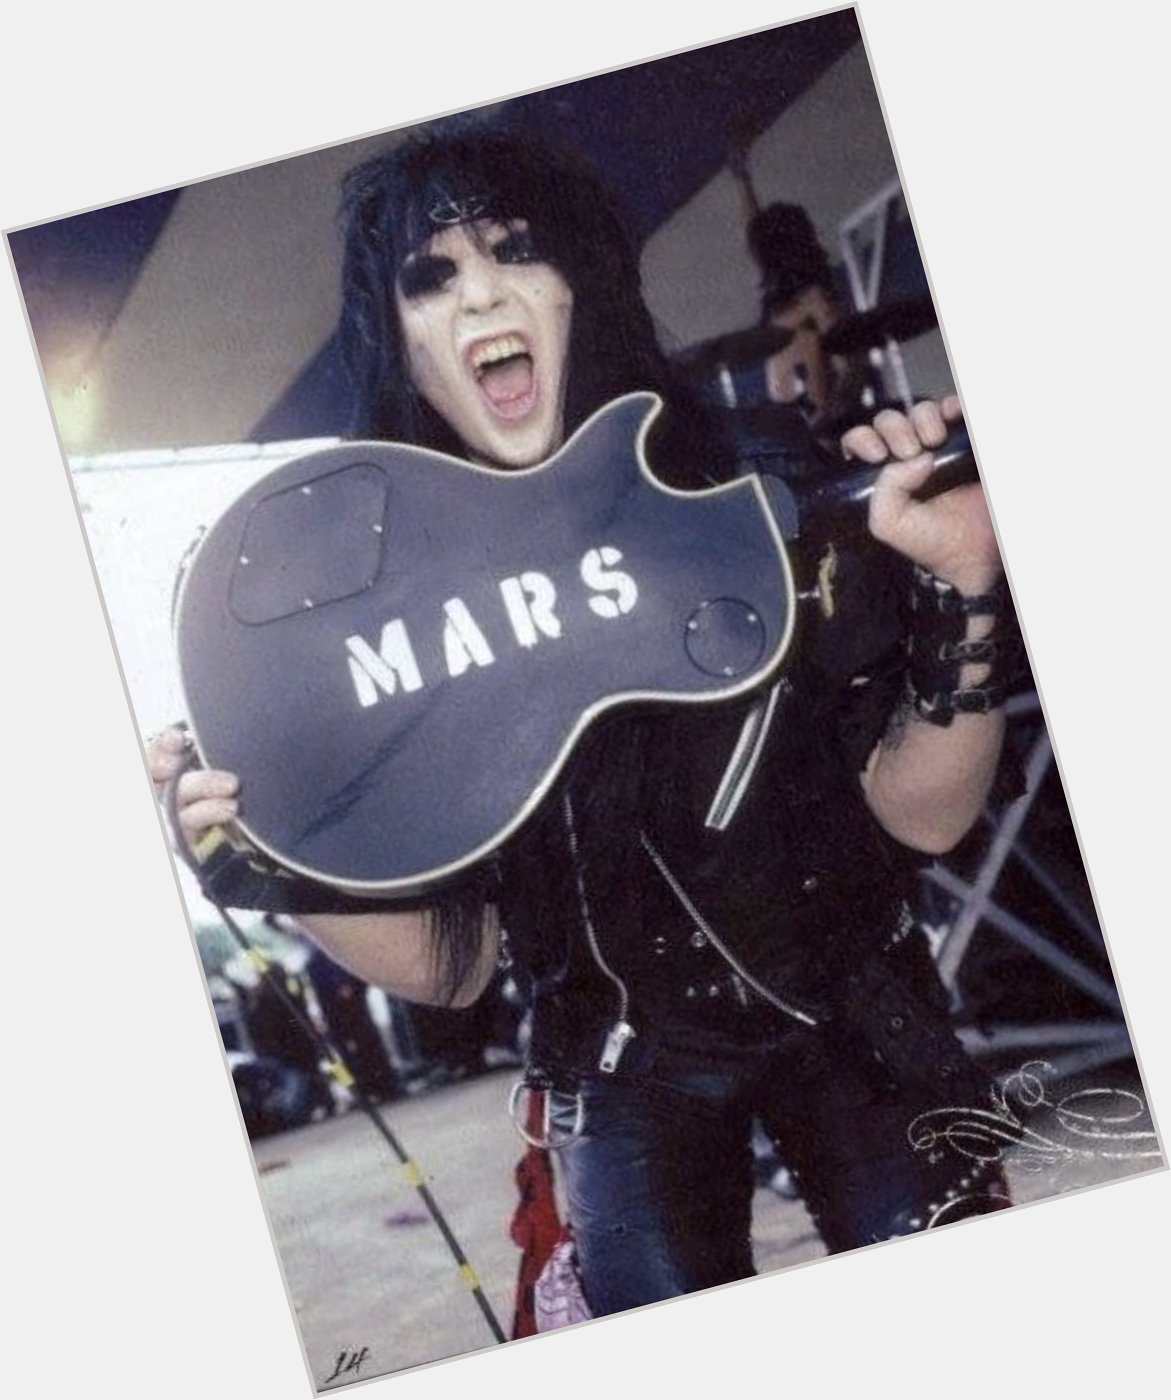 Happy birthday to mr. mick mars, one of the greatest guitarists ever   1313 